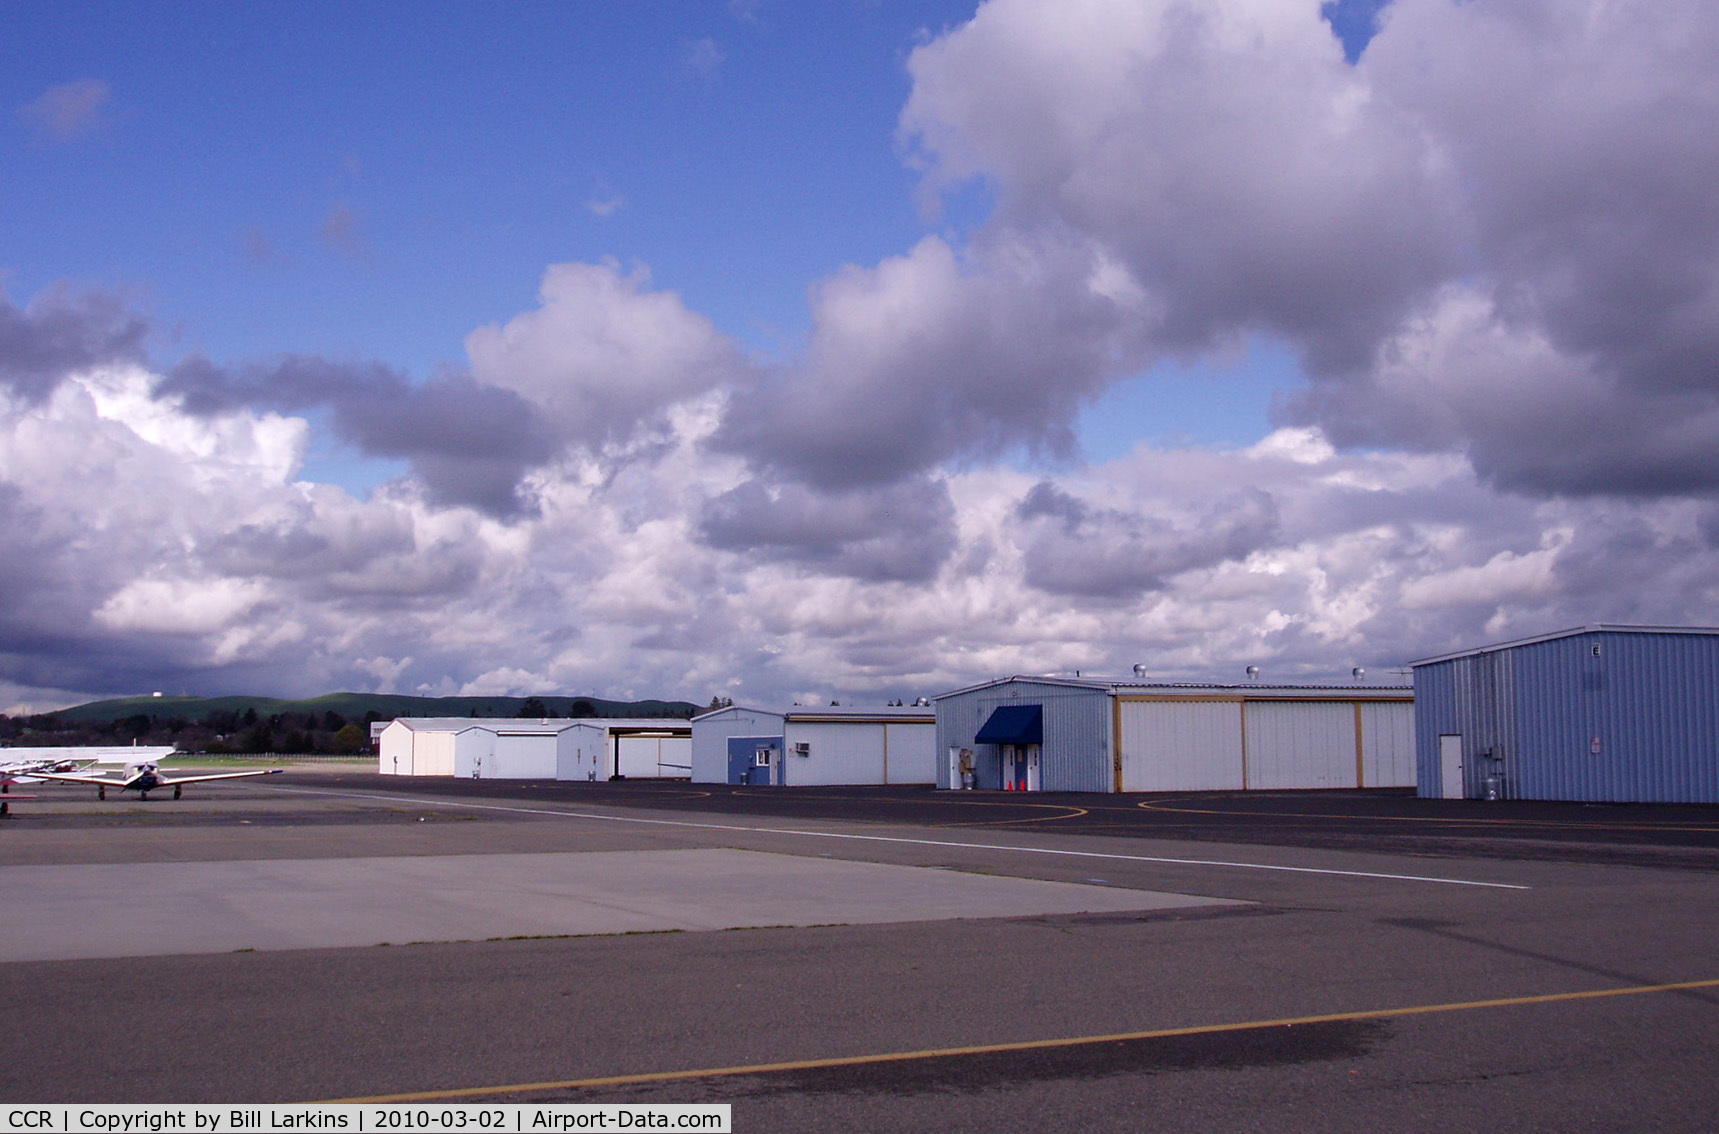 Buchanan Field Airport (CCR) - Small hangars on the East Ramp near Concord. Pilots lounge at the blue awning. 